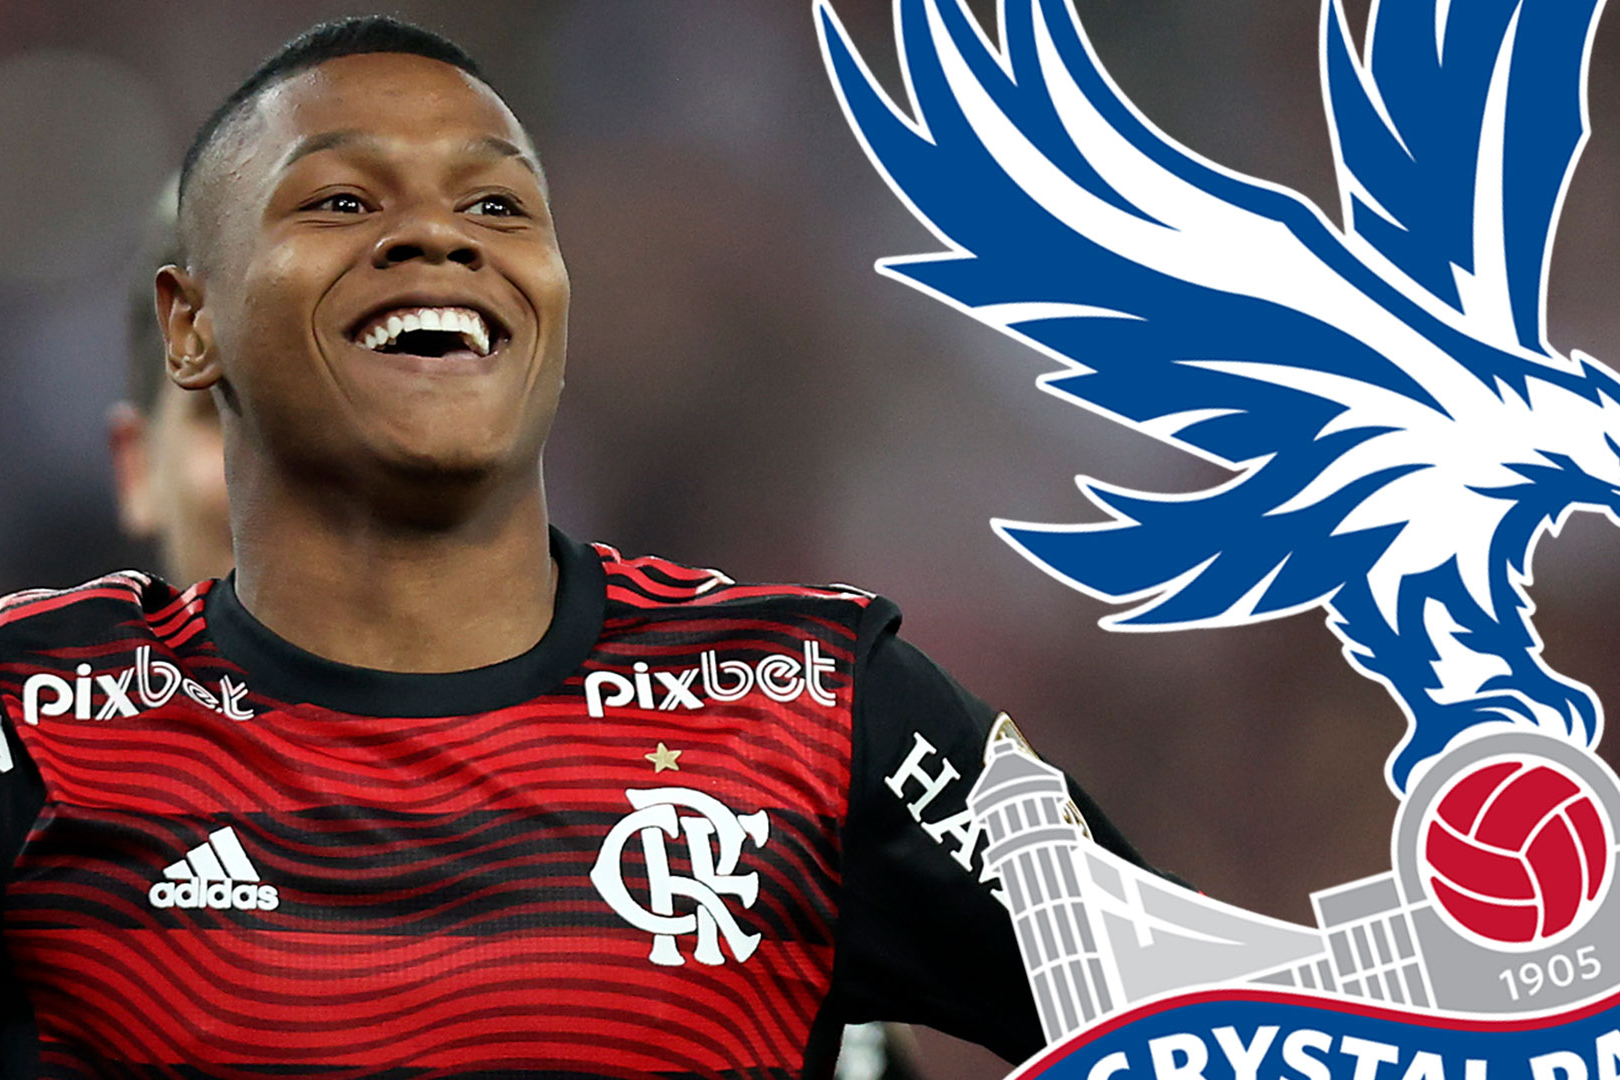 Crystal Palace complete the signing of young Brazilian midfielder Matheus Franca from Flamengo for £26m